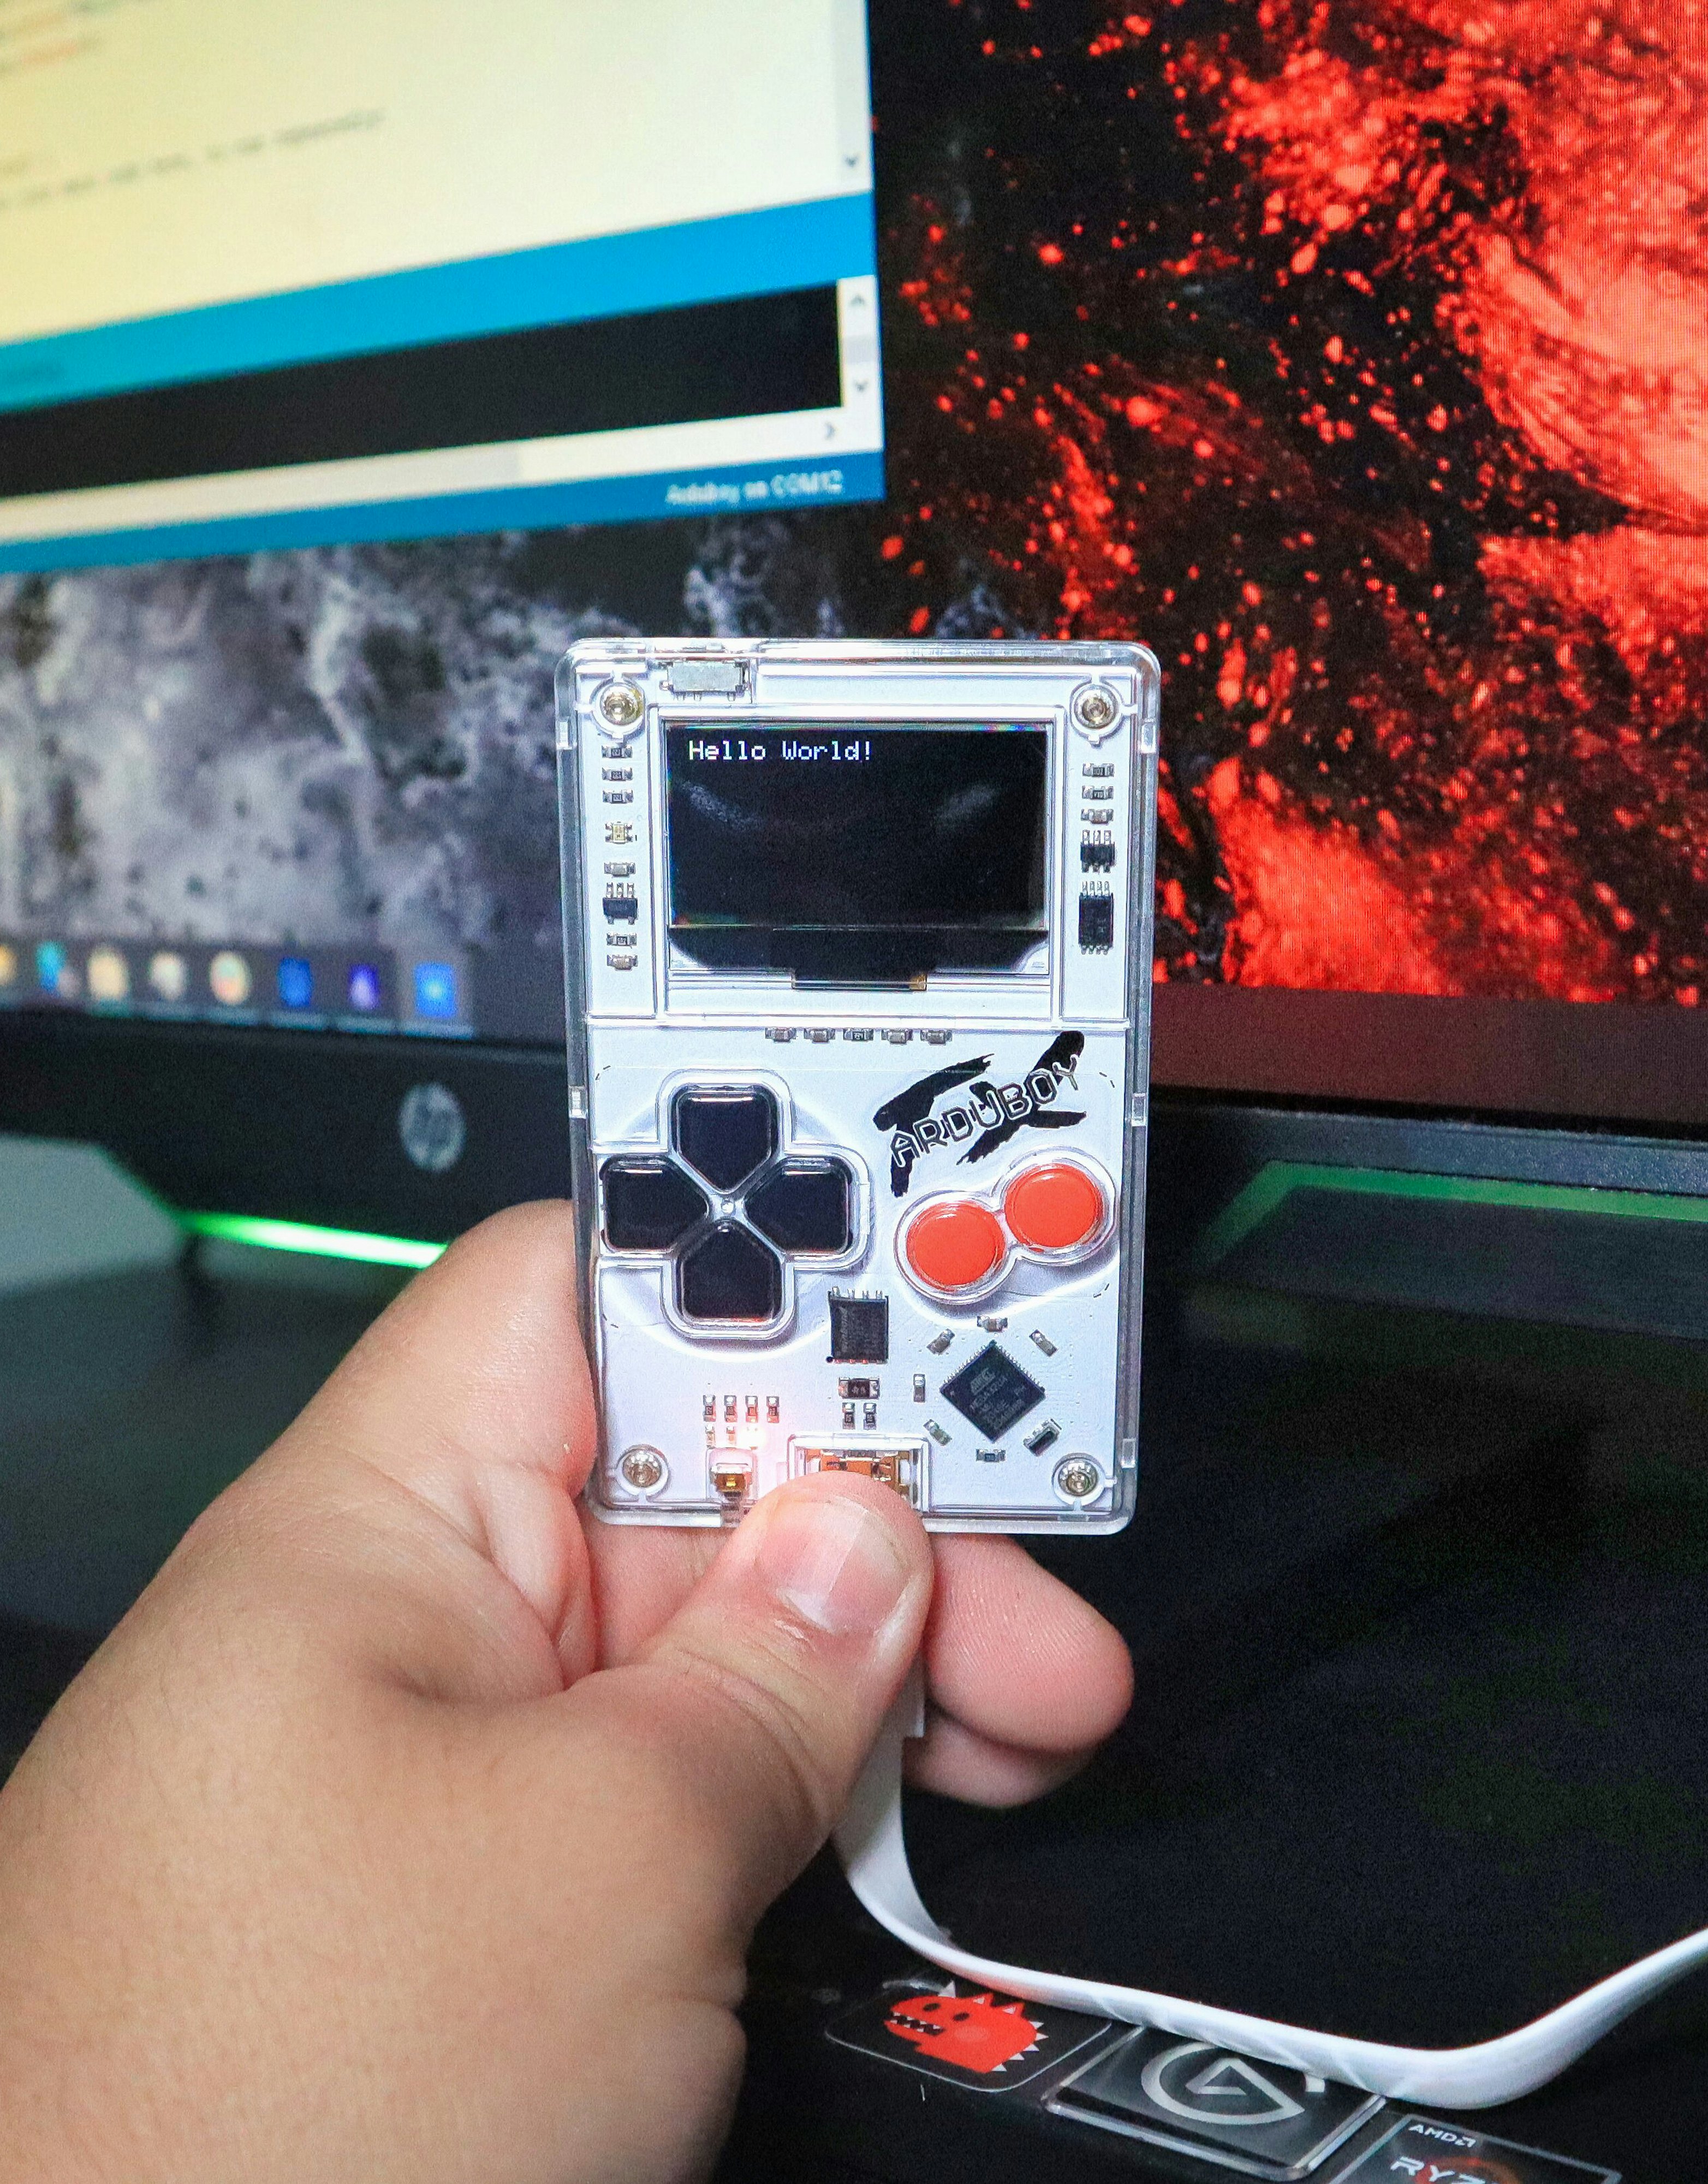 The Arduboy FX is no quirky Playdate, but it's still adorably dope